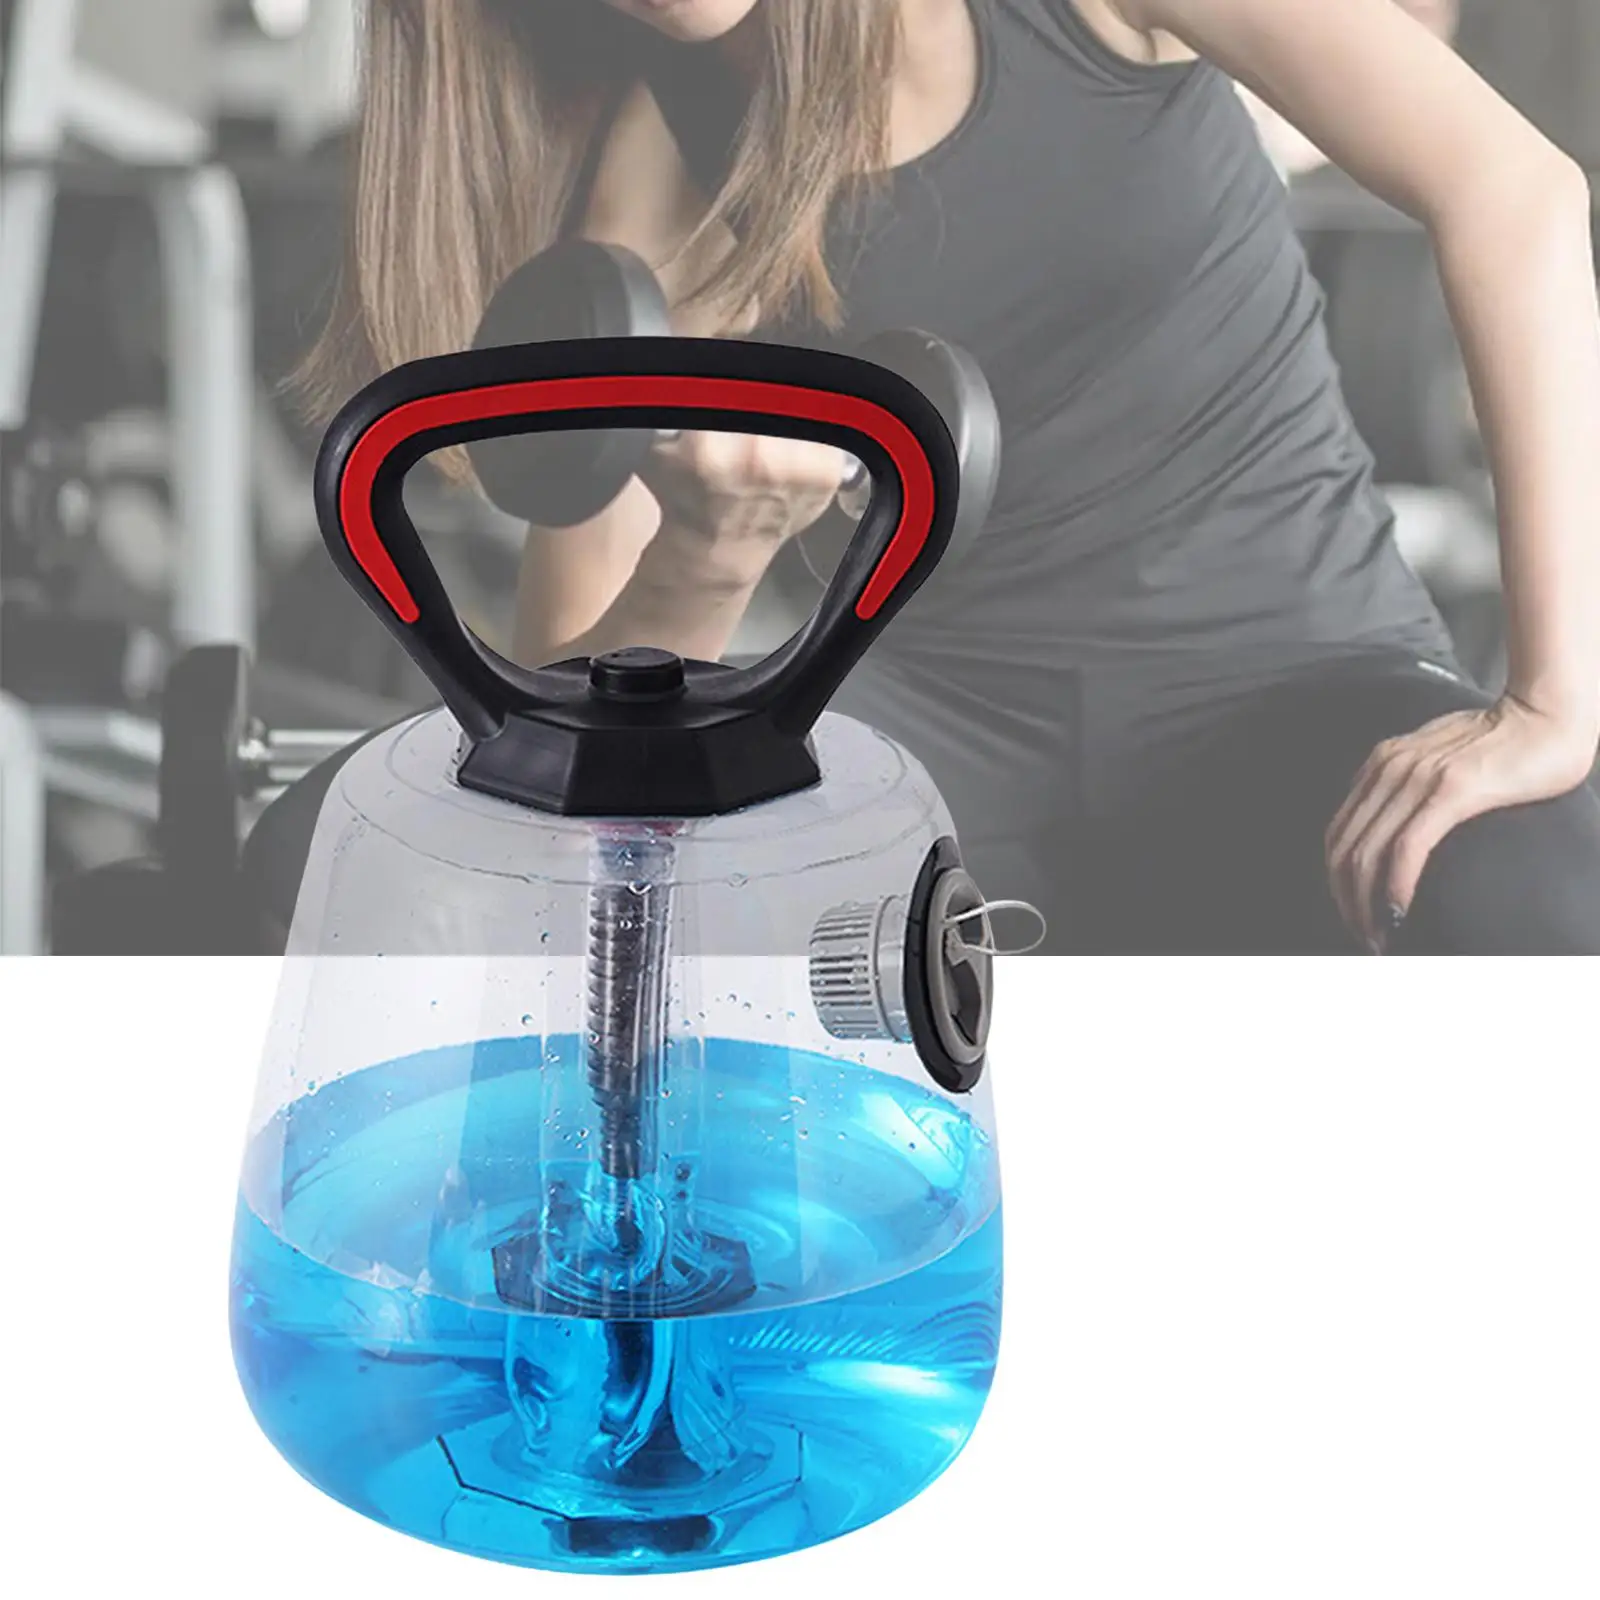 Water Filled Kettlebell Equipment Adjustable Water Bottle Weight Lifting for Exercising Household Full Body Men Workout